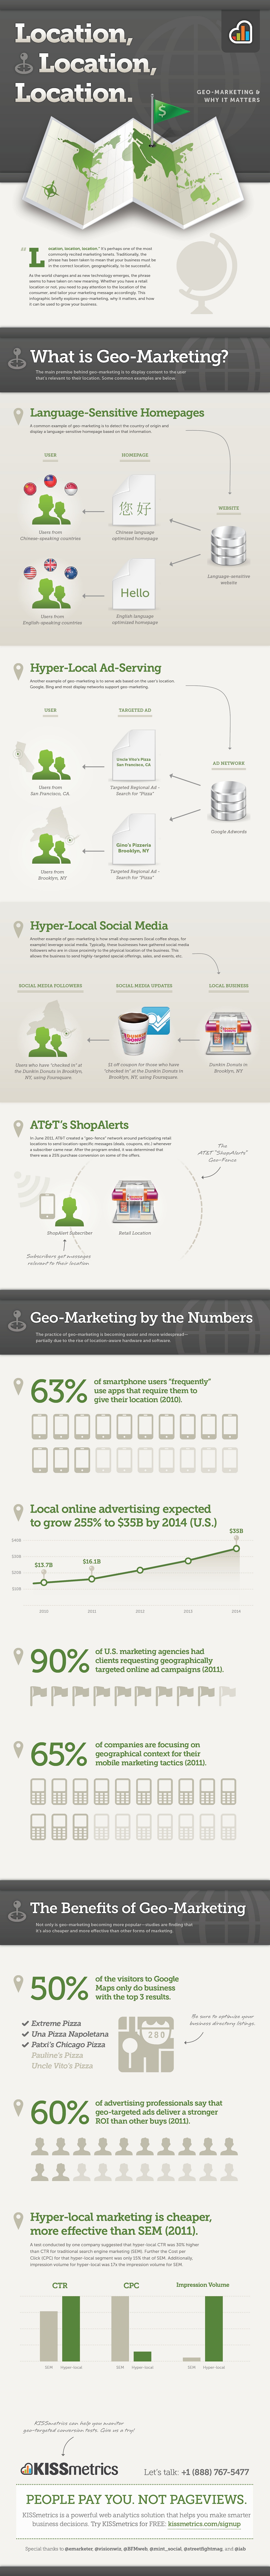 Geo-Marketing and Why It Matters